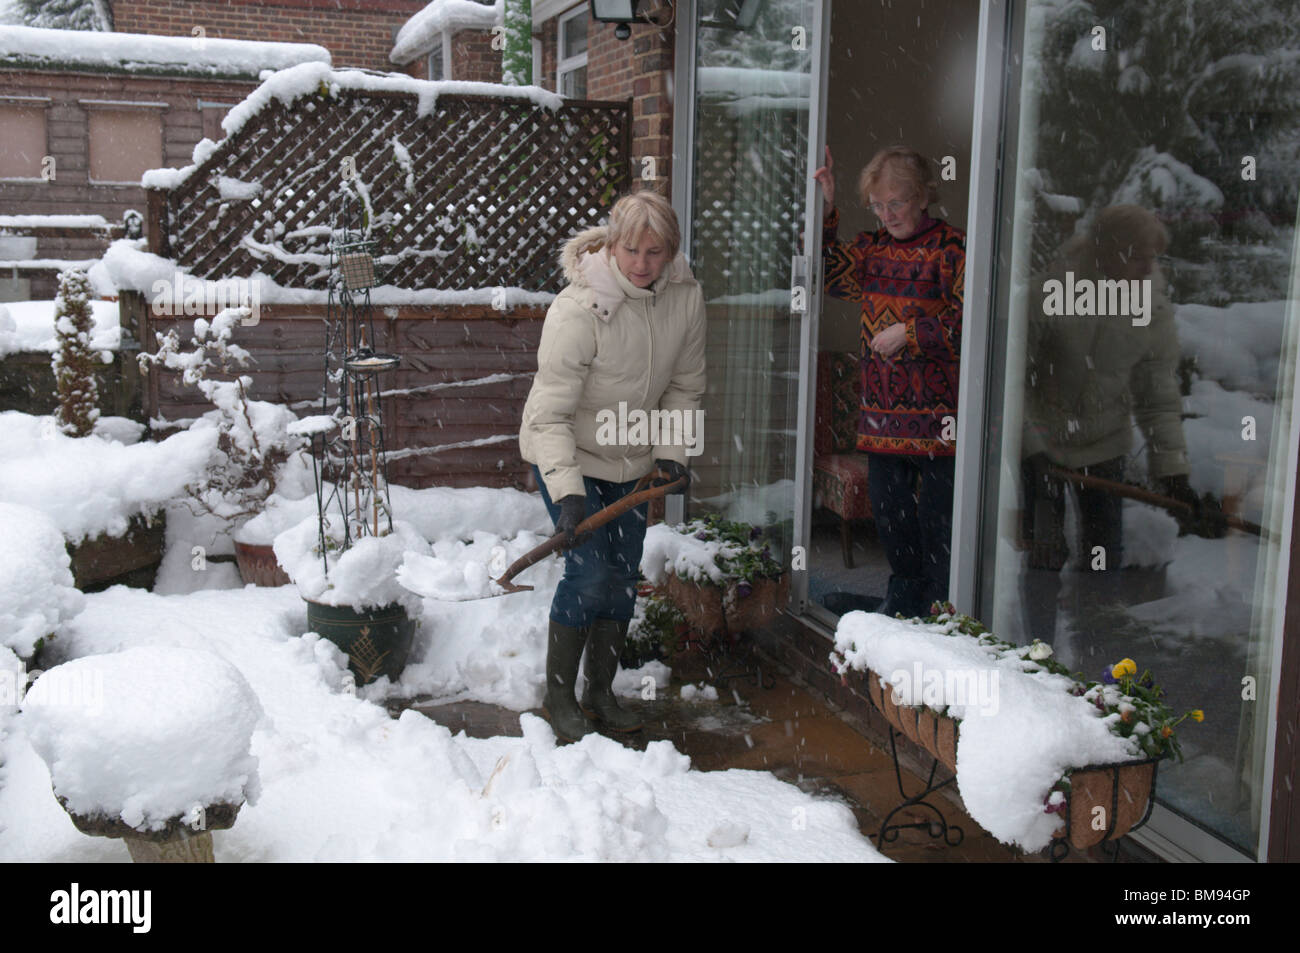 neighbour relative helping elderly person by clearing snow from path Stock Photo